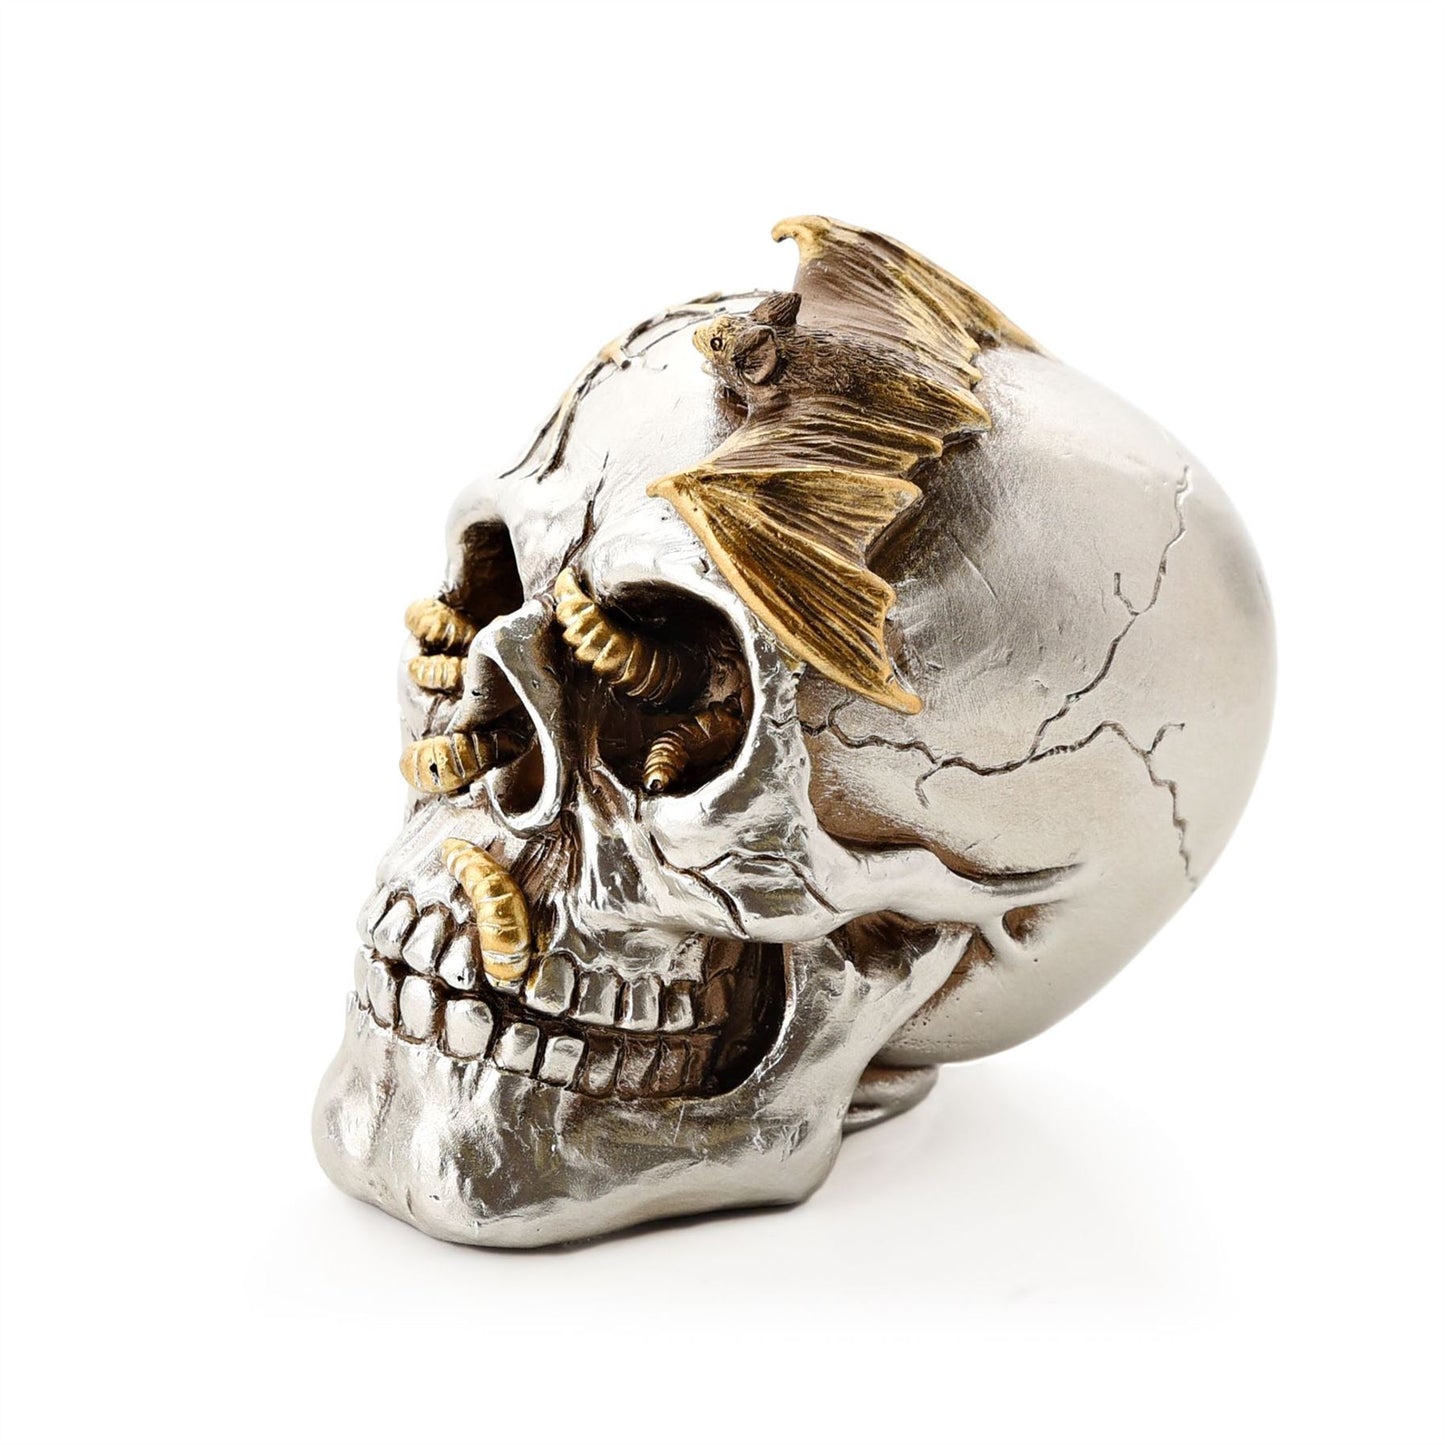 Silver Skull with Bat Resin Figurine